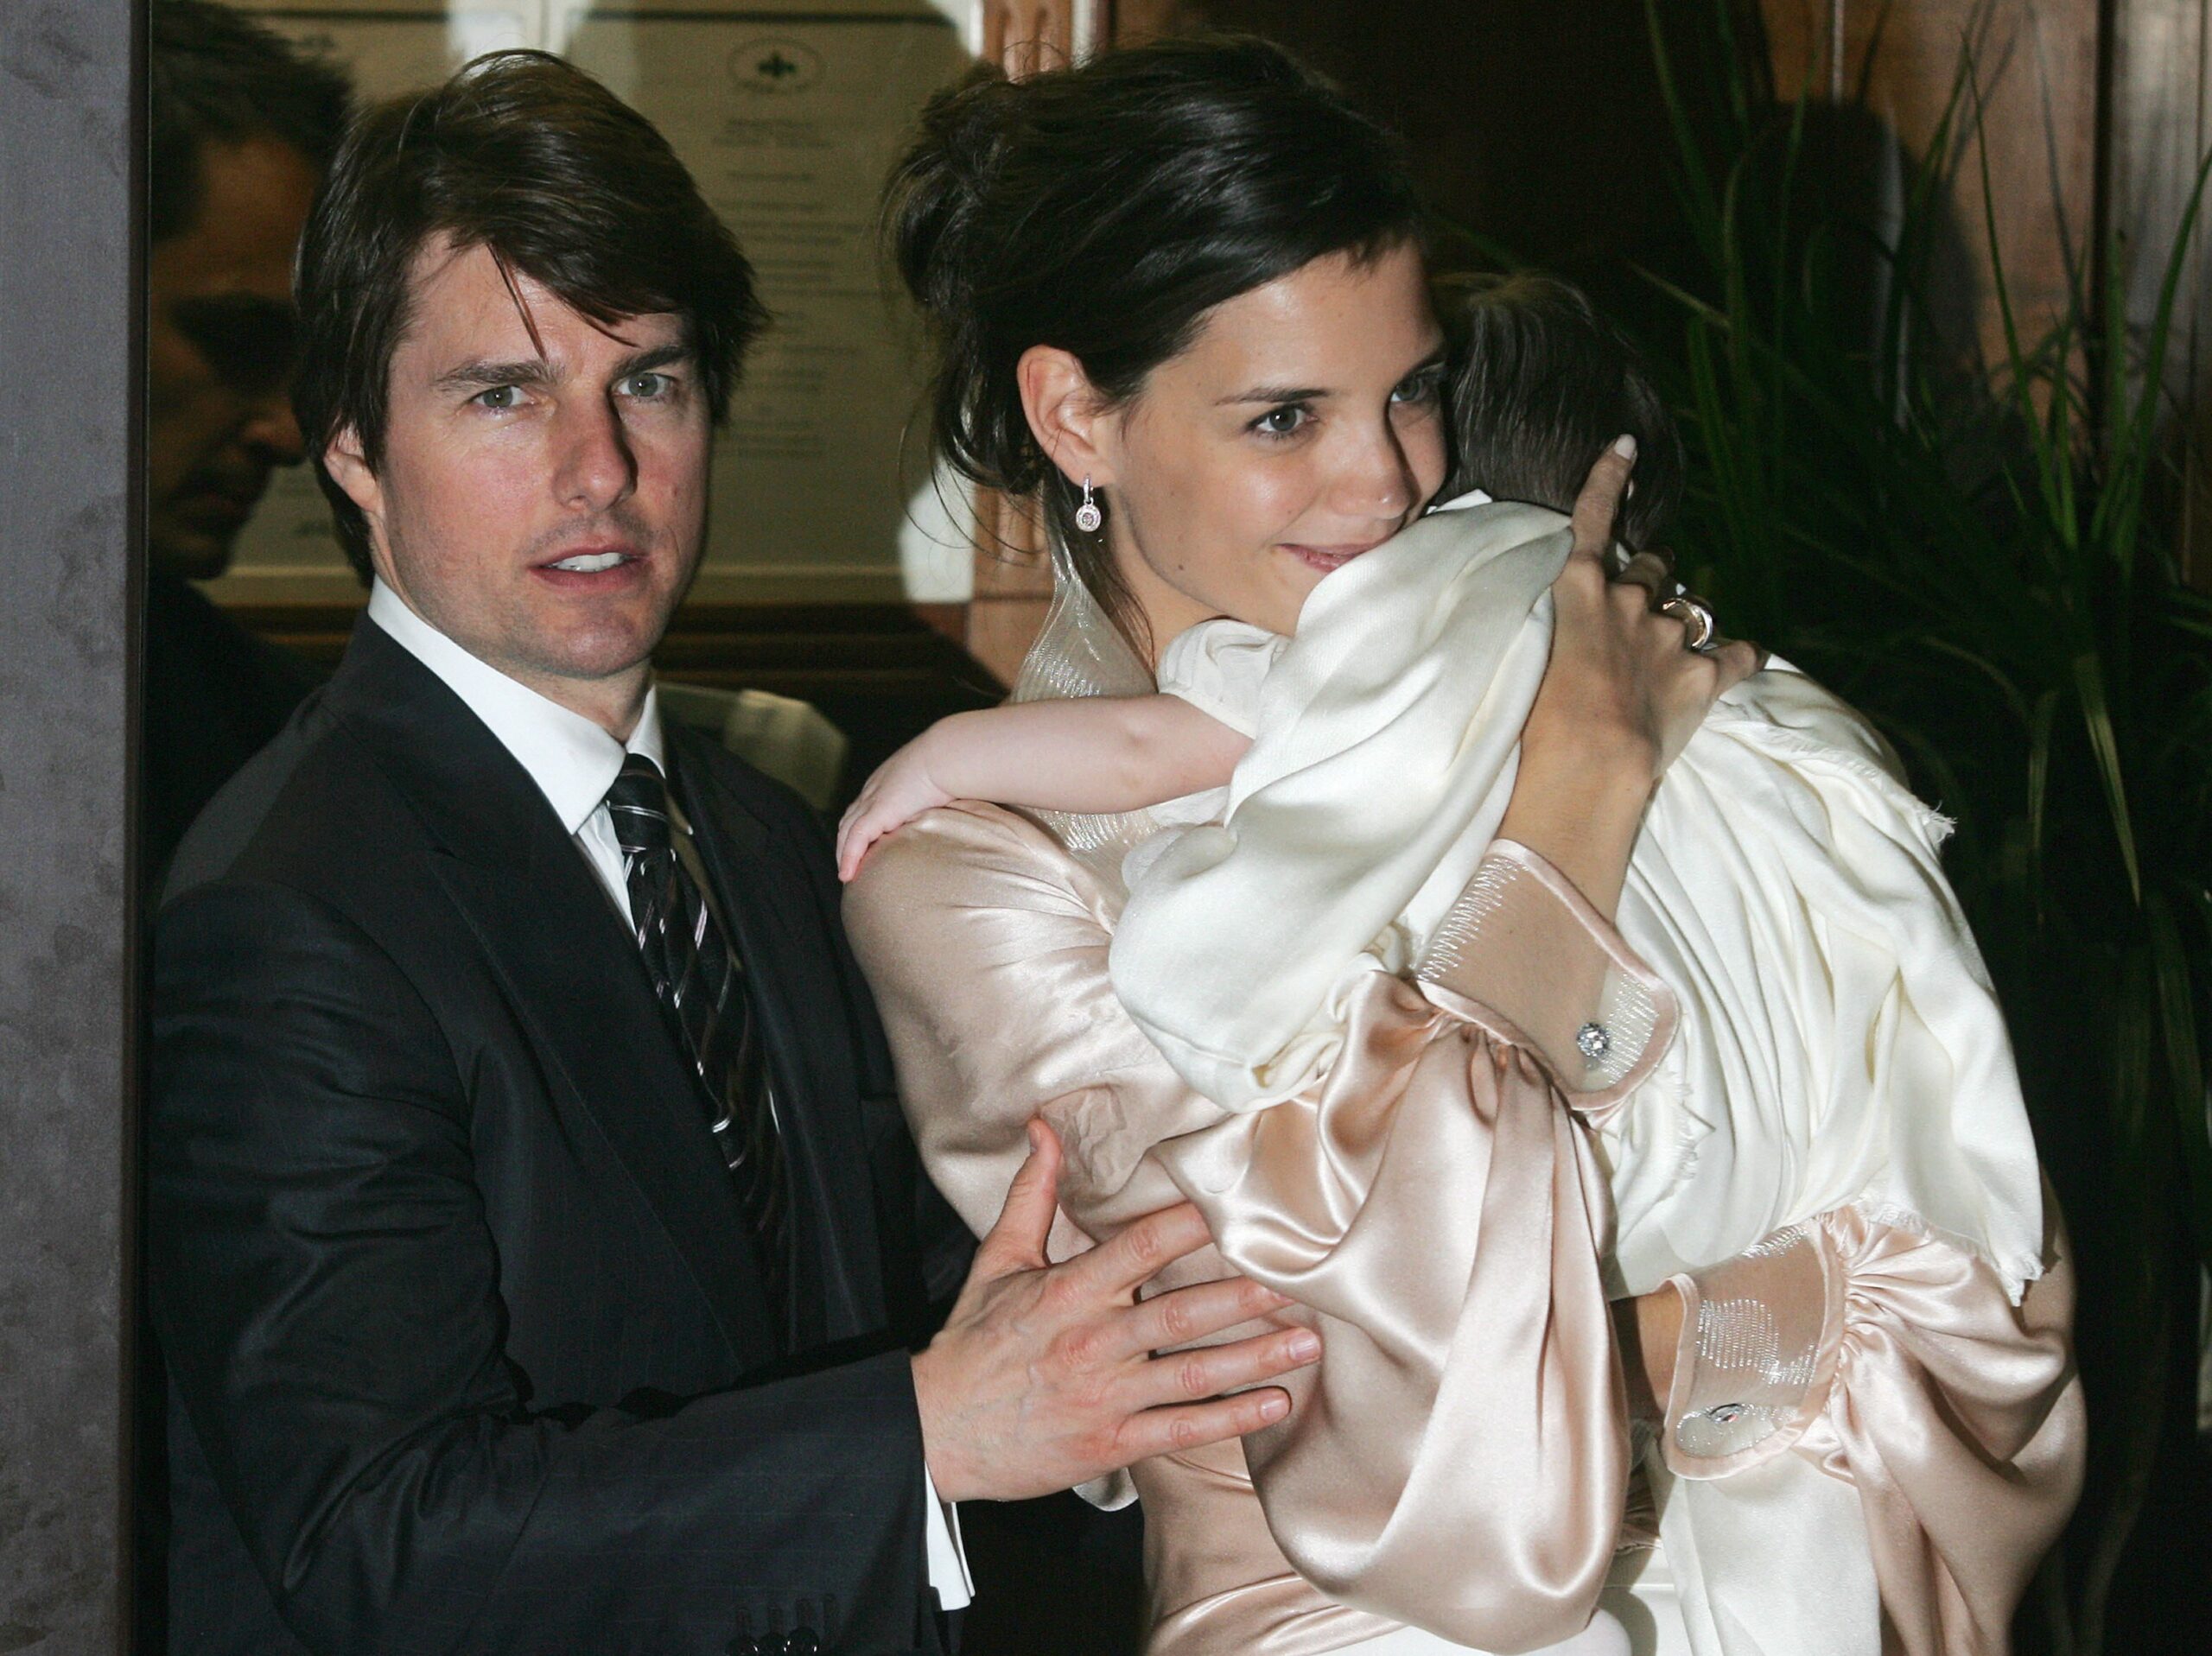 Tom Cruise and Katie Holmes holding their daughter, Suri, in central Rome, on November 17, 2006. | Source: Getty Images